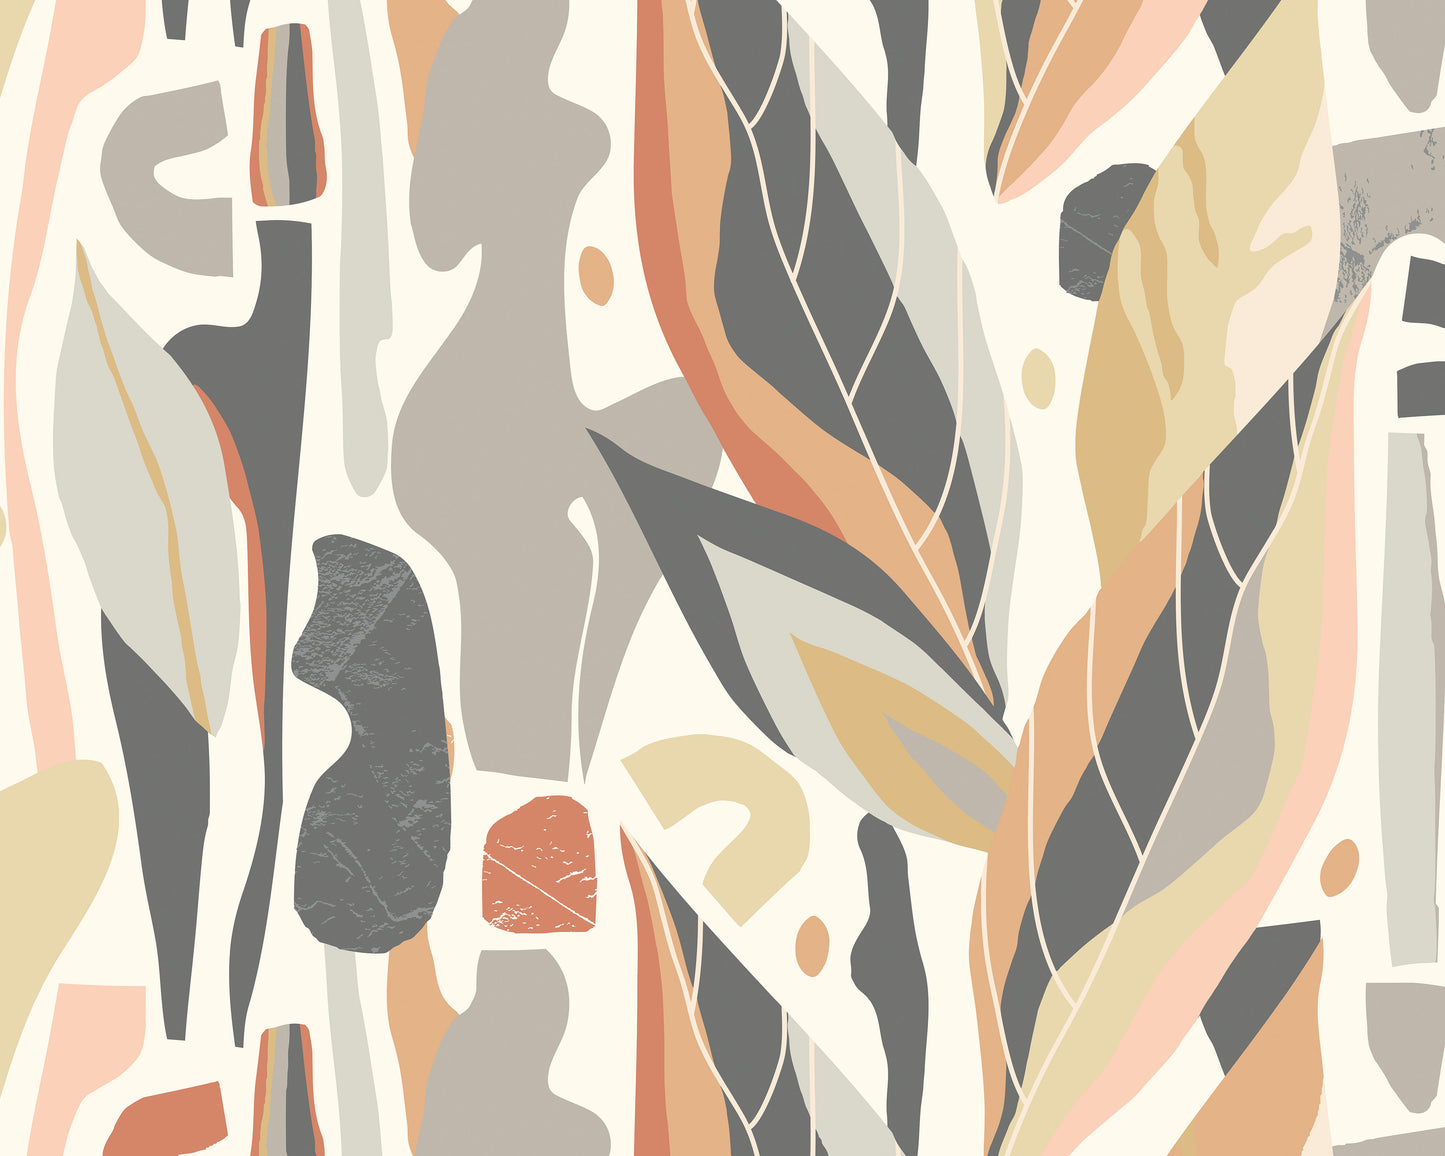 ABSTRACT LEAF SHAPES - Grey